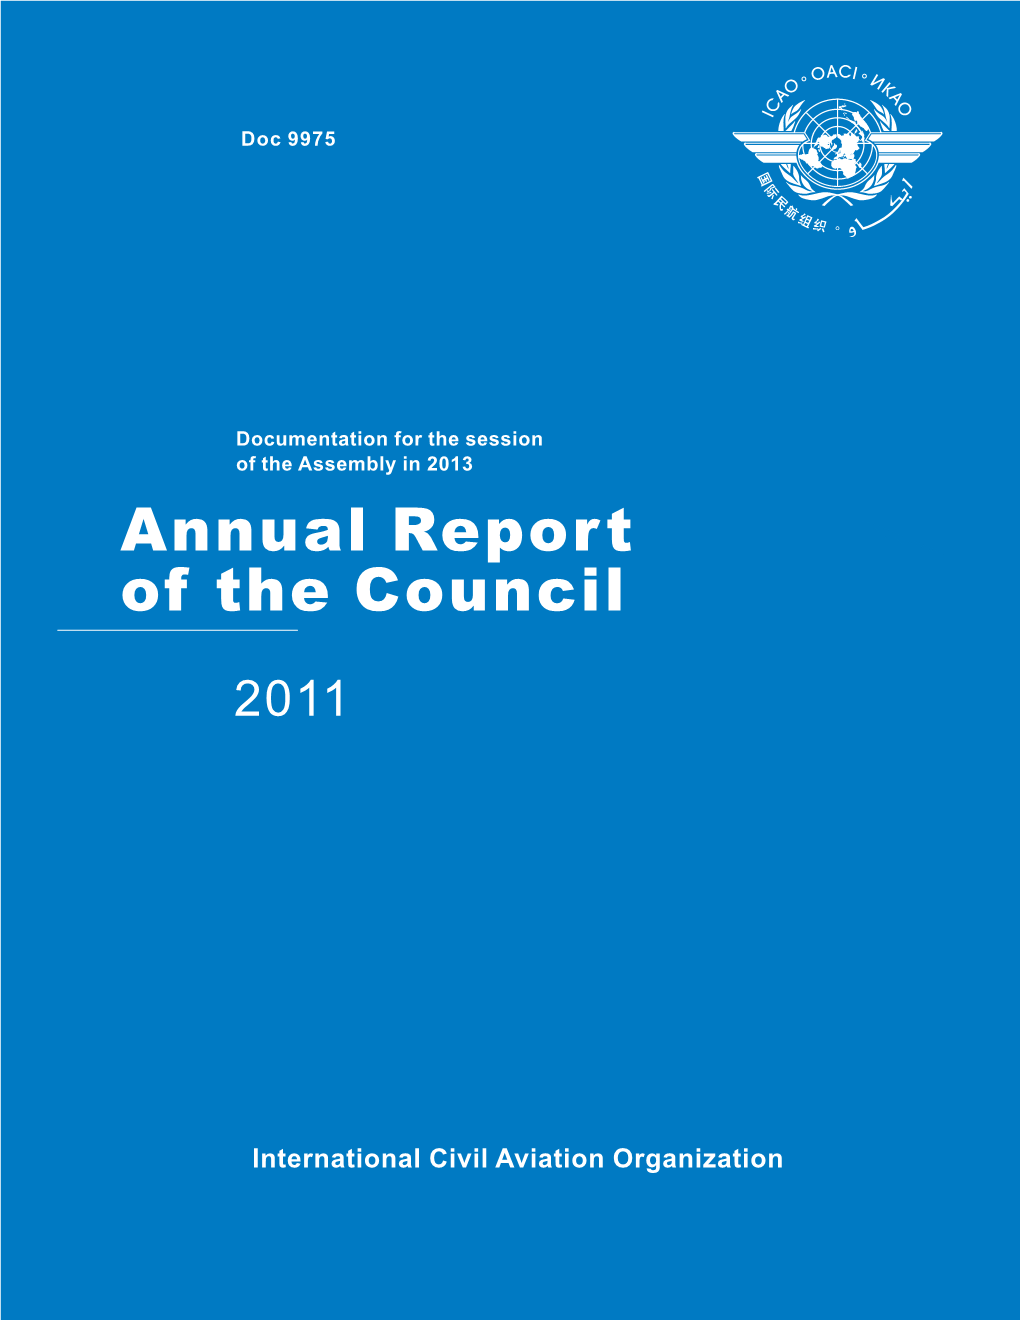 Annual Report of the Council